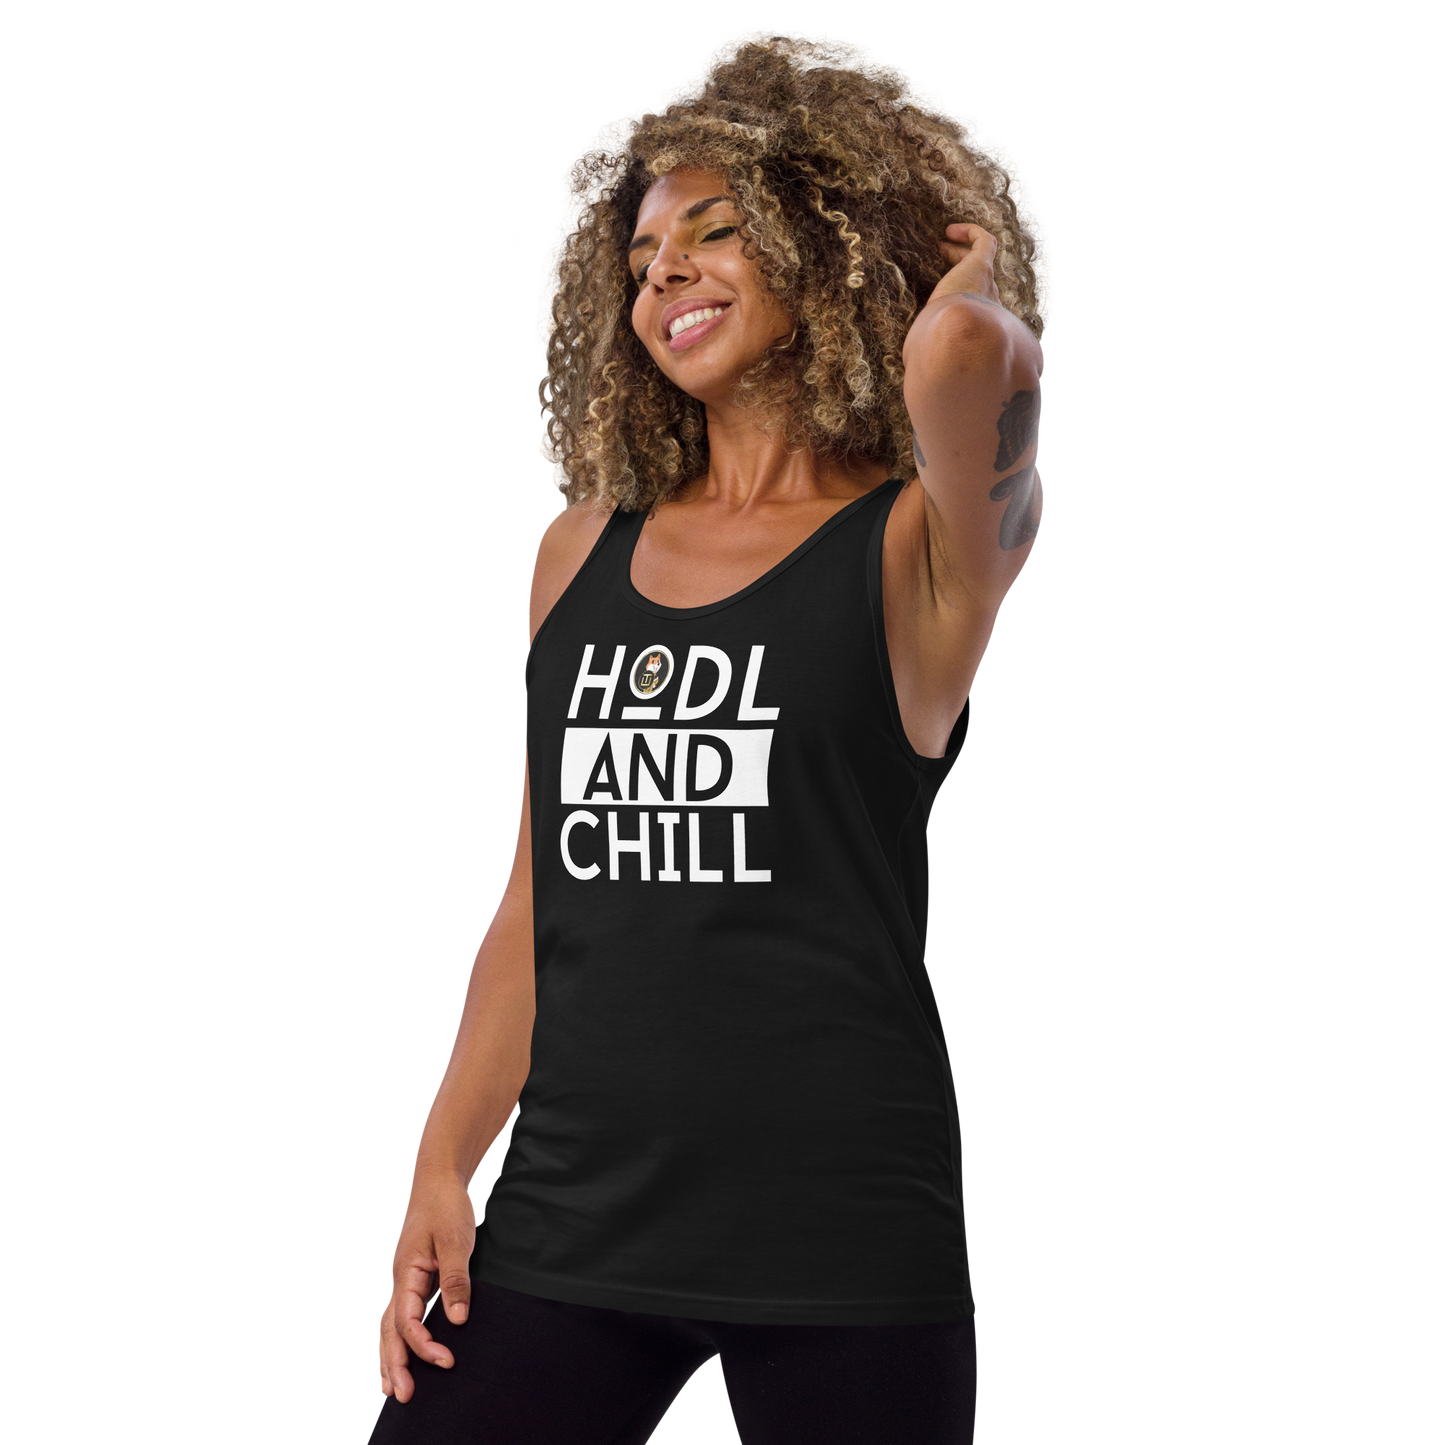 Son Of Doge 'Hodl And Chill' Women's Tank Top